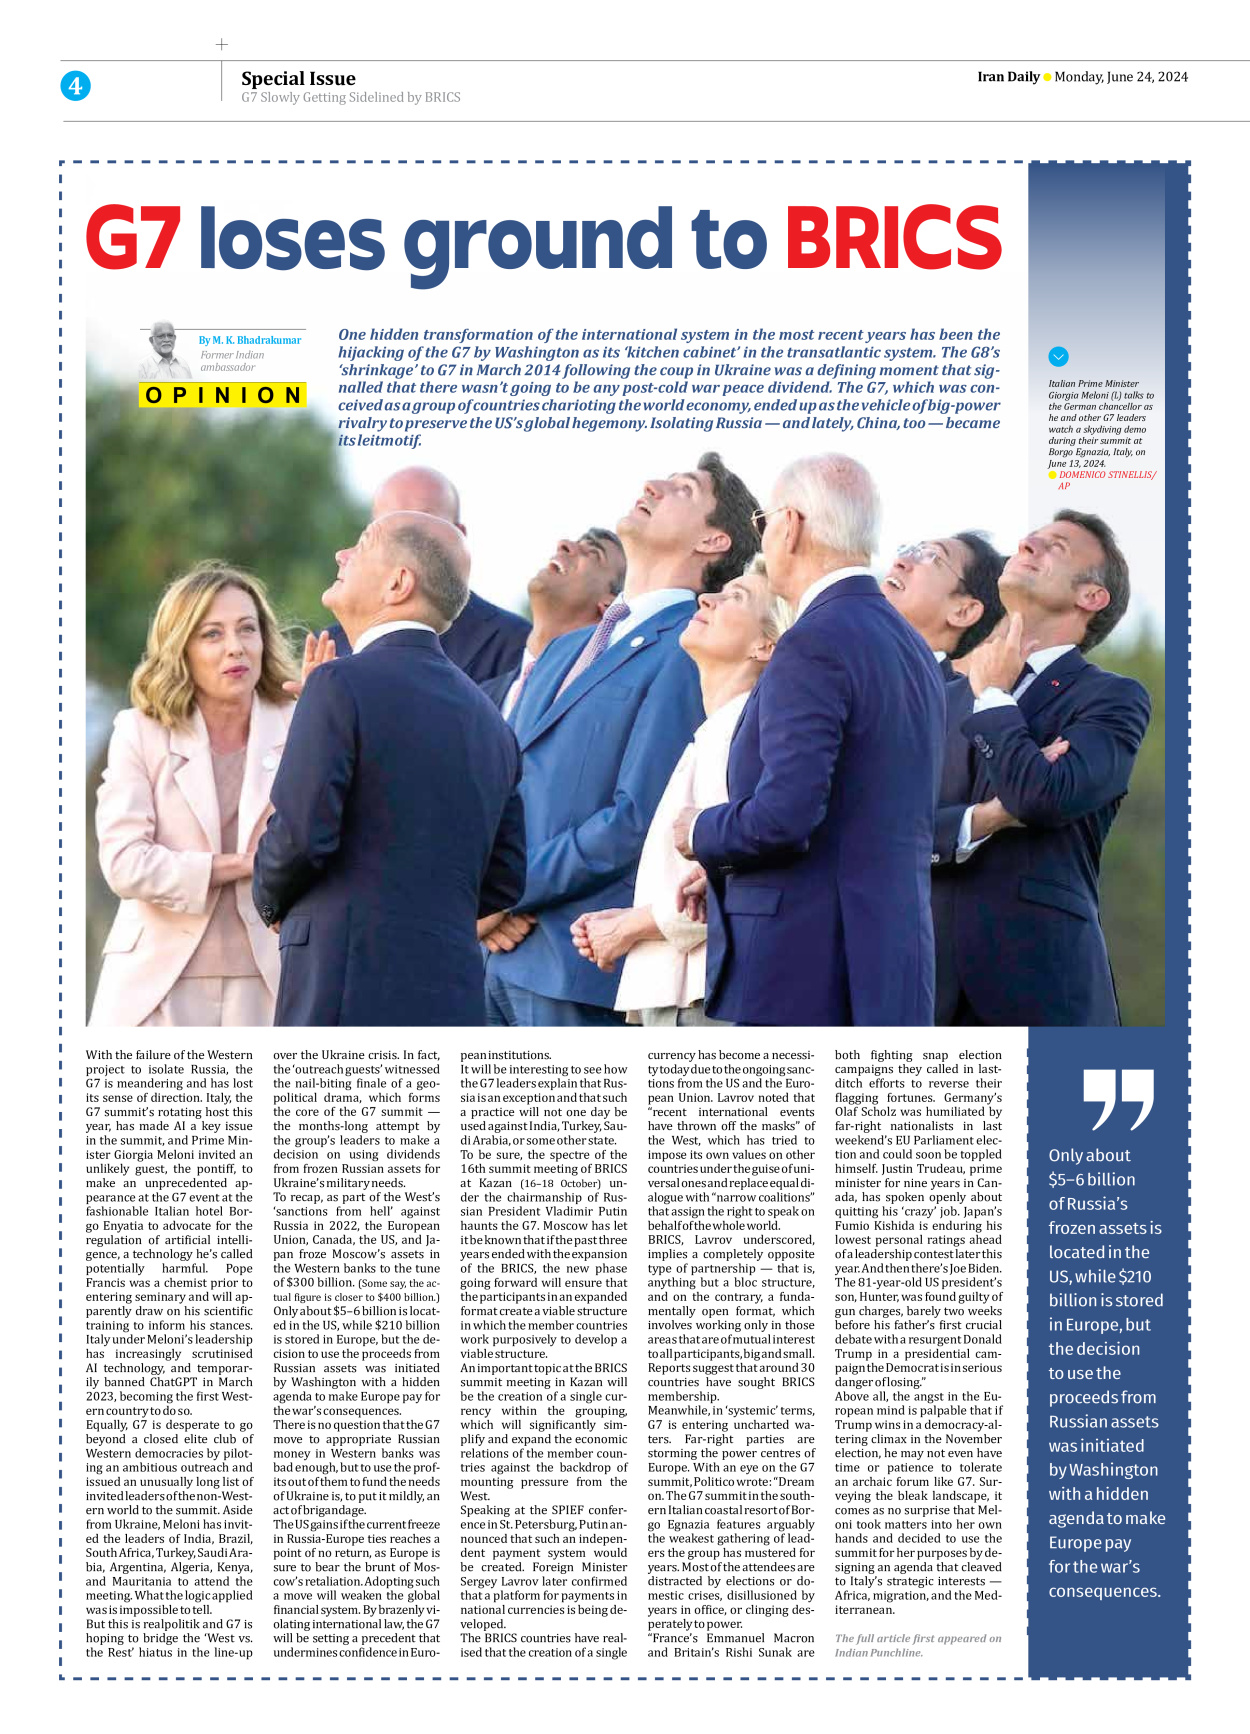 Iran Daily - Number Seven Thousand Five Hundred and Eighty Eight - 24 June 2024 - Page 4